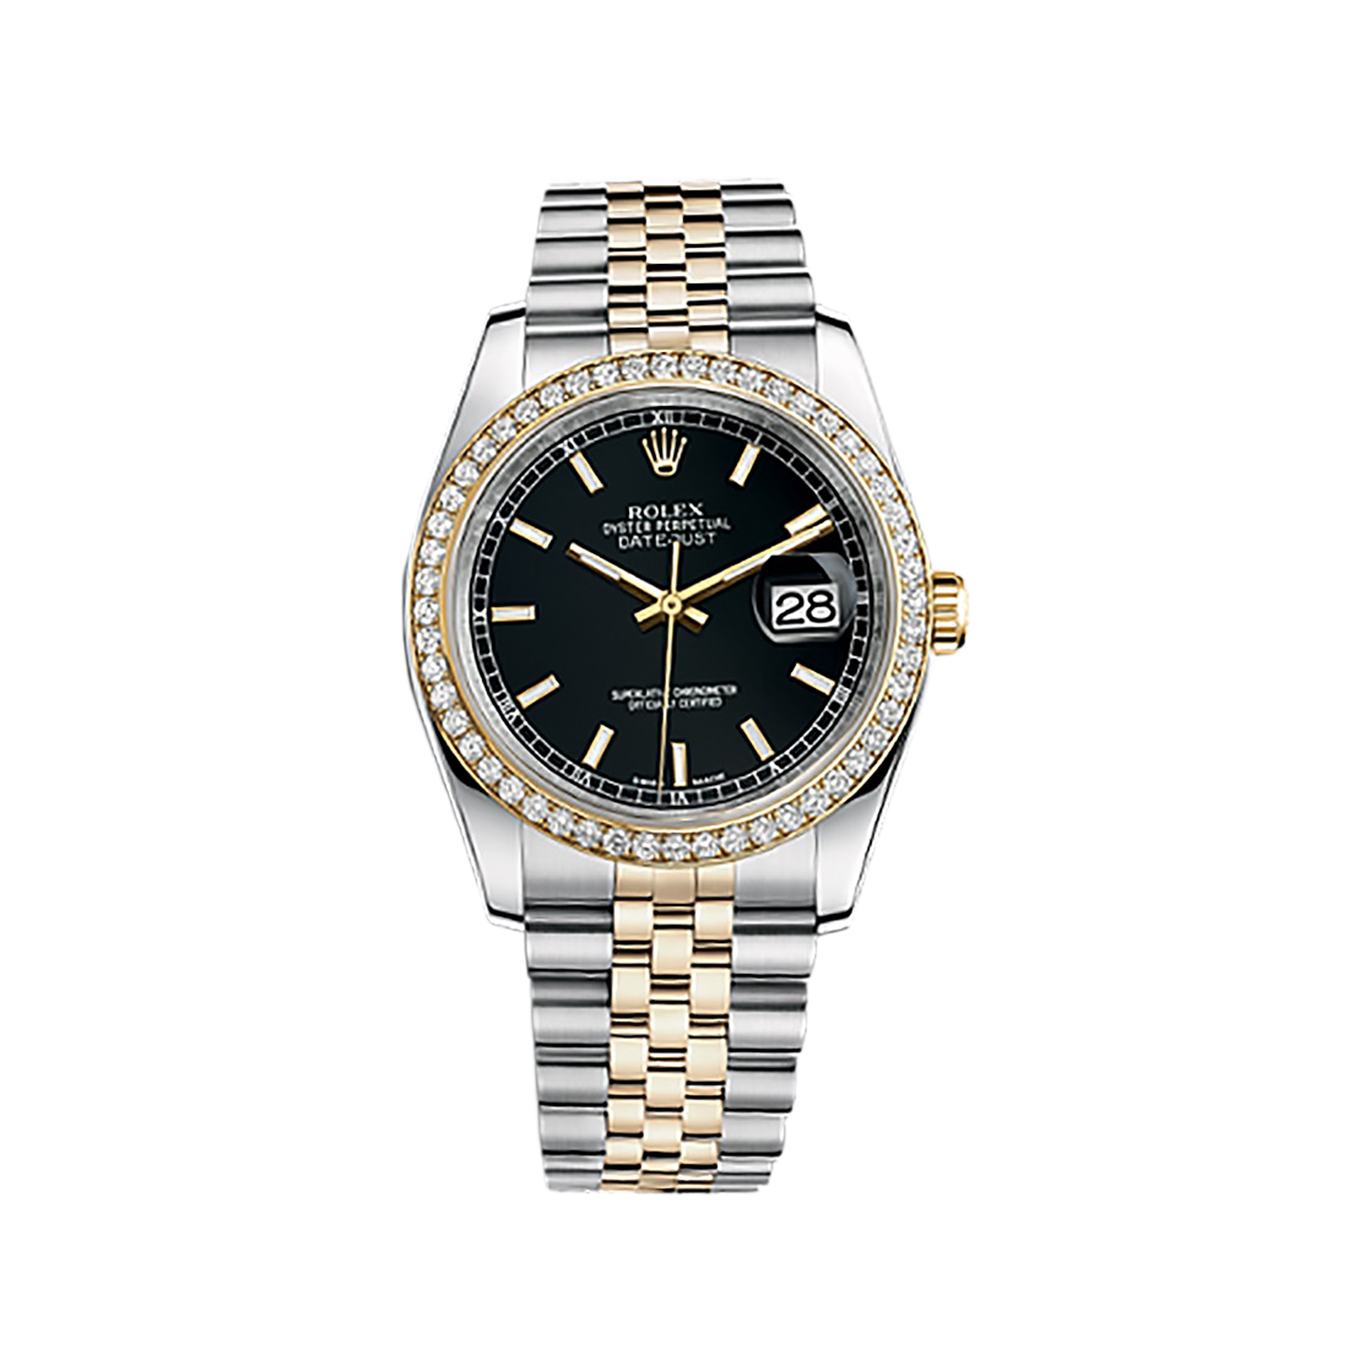 Datejust 36 116243 Gold & Stainless Steel Watch (Black)